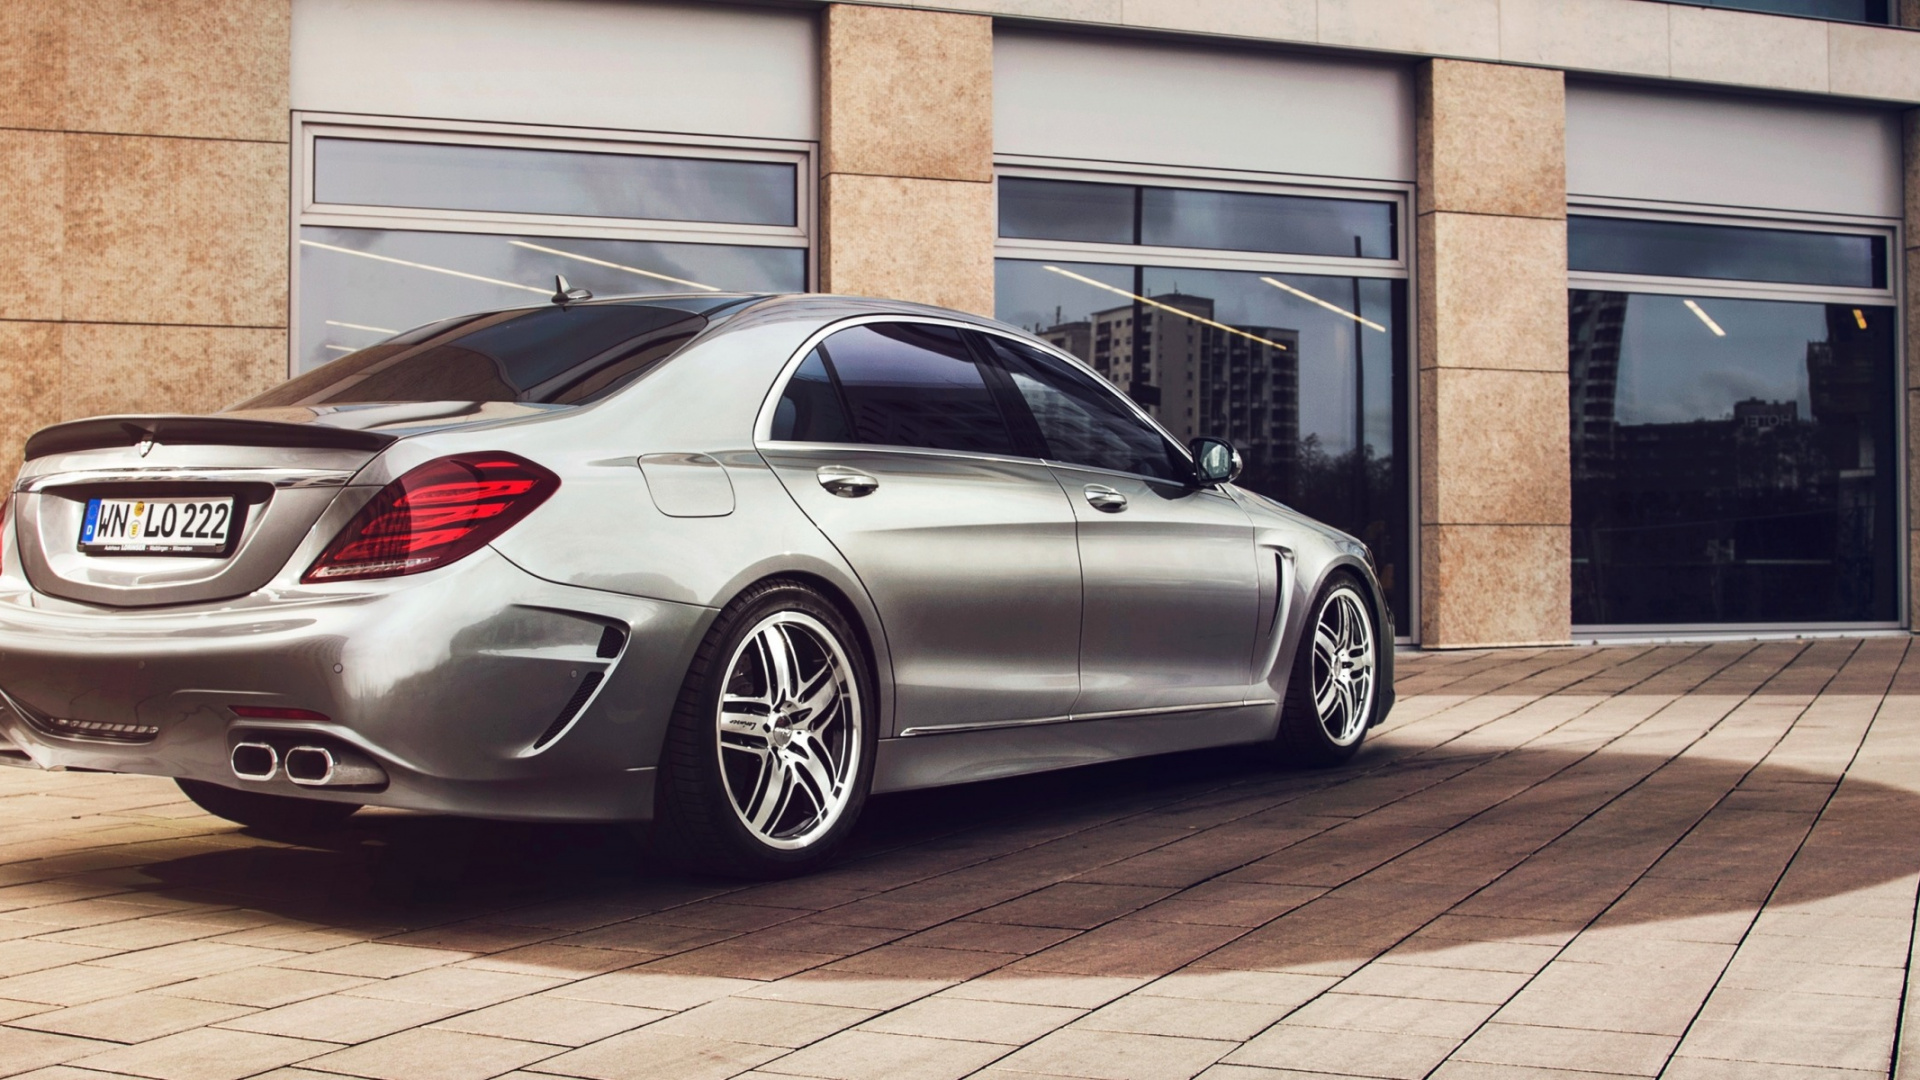 Silver Mercedes Benz Coupe Parked on Brown Brick Floor. Wallpaper in 1920x1080 Resolution